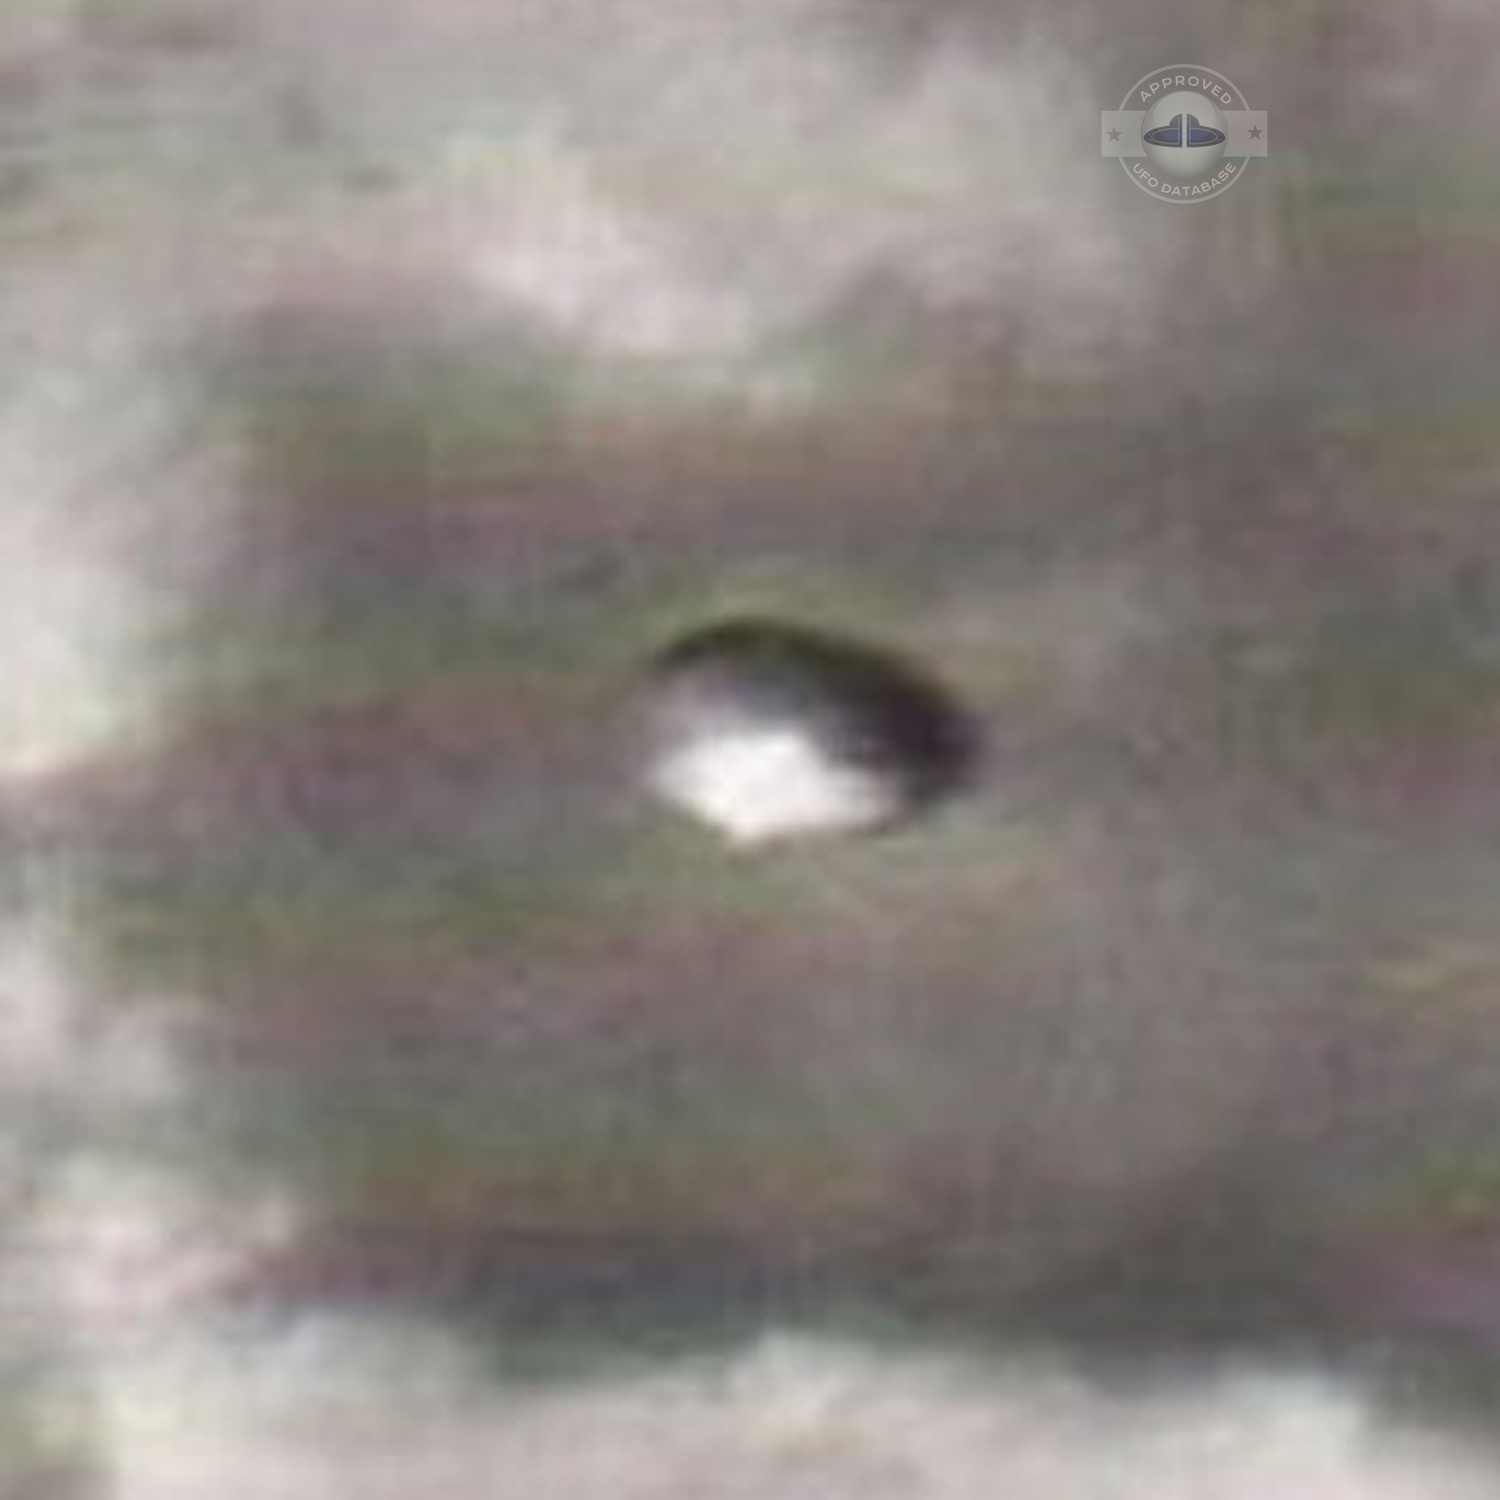 UFO picture of UFO flying over the town of Rosetta in KwaZulu-Natal UFO Picture #32-4